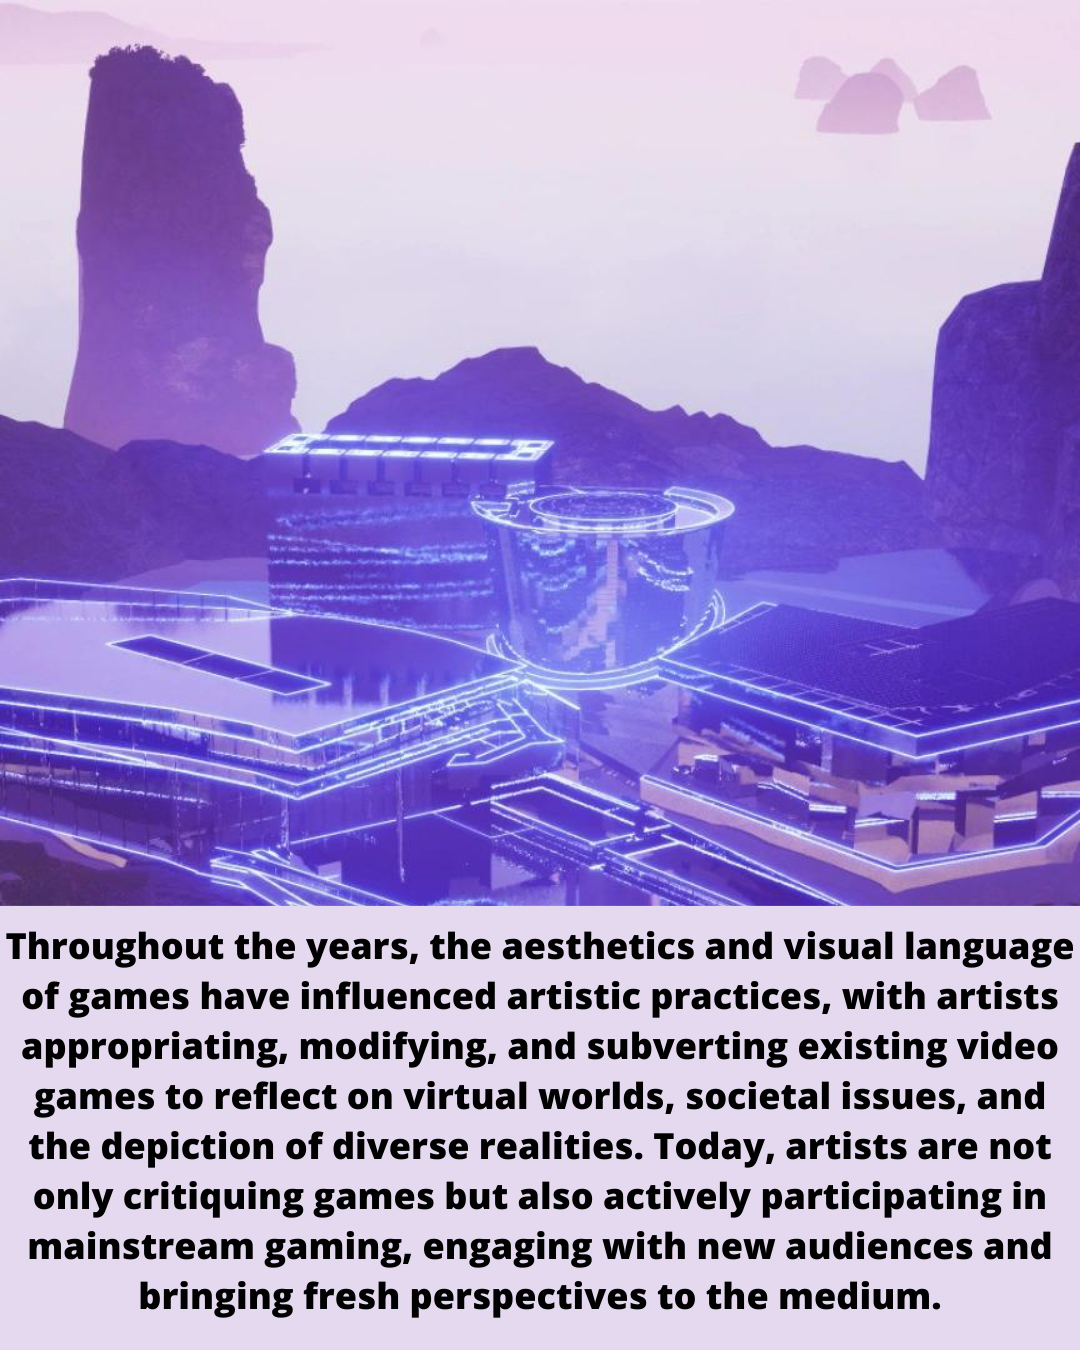 Throughout the years, the aesthetics and visual language
of games have influenced artistic practices, with artists
appropriating, modifying, and subverting existing video

games to reflect on virtual worlds, societal issues, and
the depiction of diverse realities. Today, artists are not
only critiquing games but also actively participating in
mainstream gaming, engaging with new audiences and
bringing fresh perspectives to the medium.